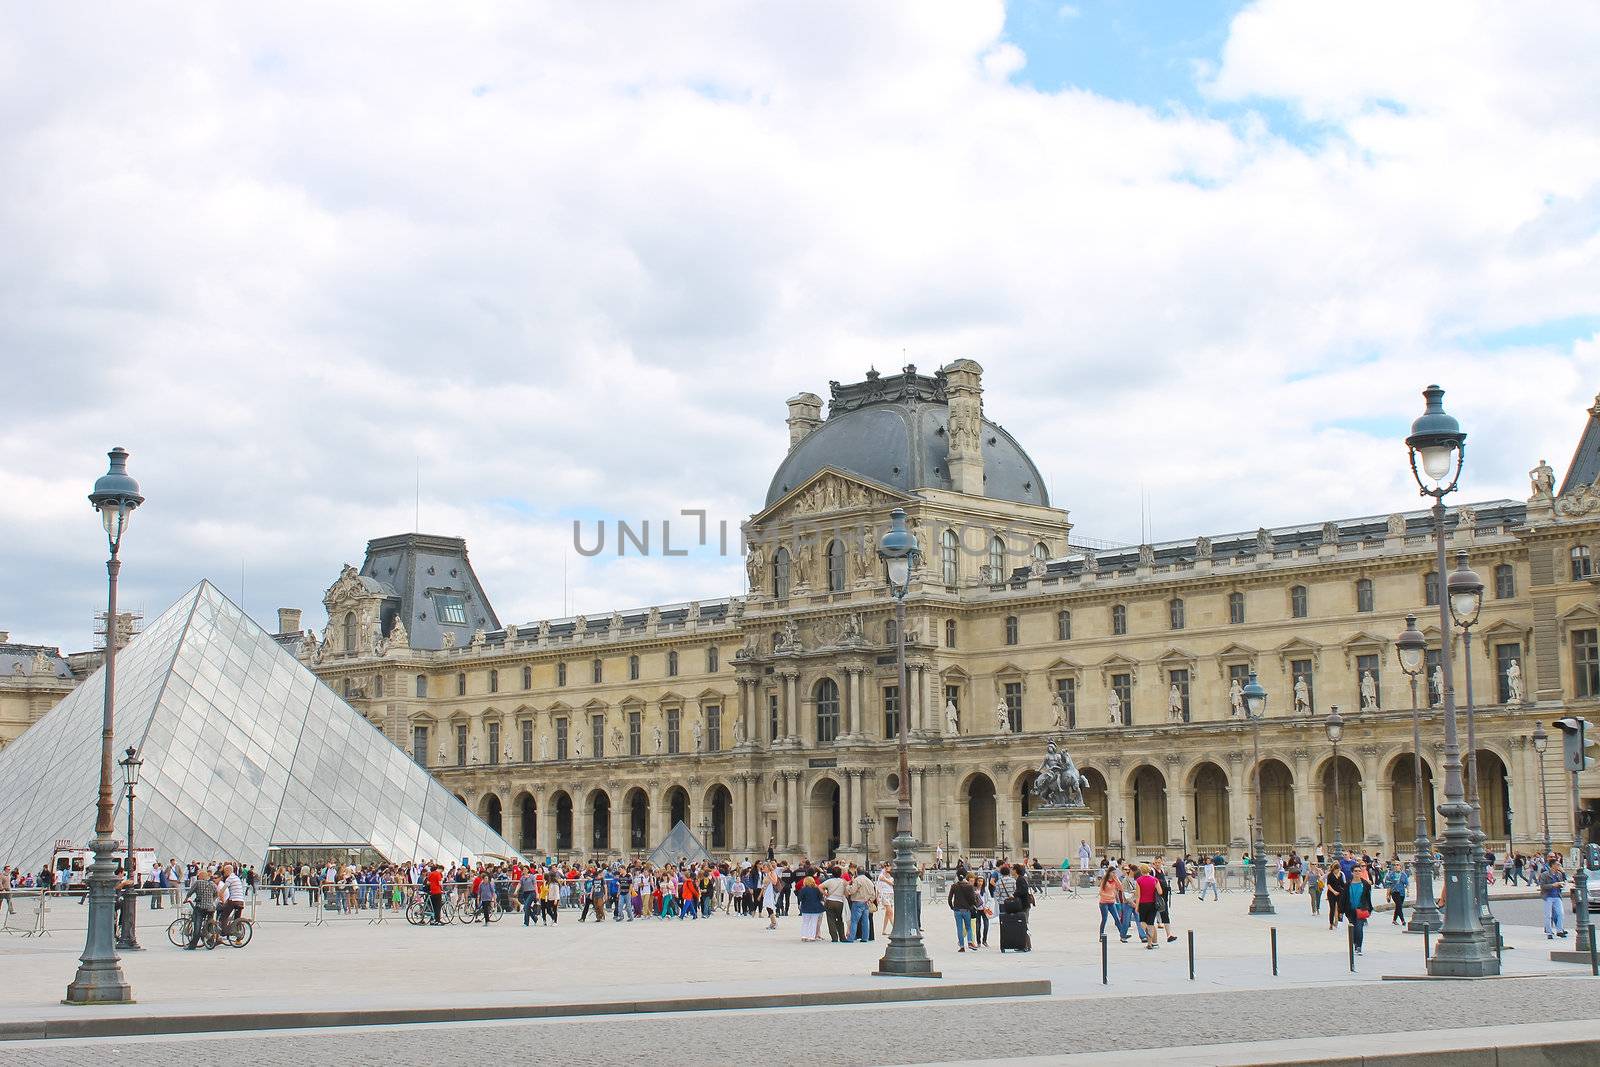 People in the square in front of the Louvre. Paris. France